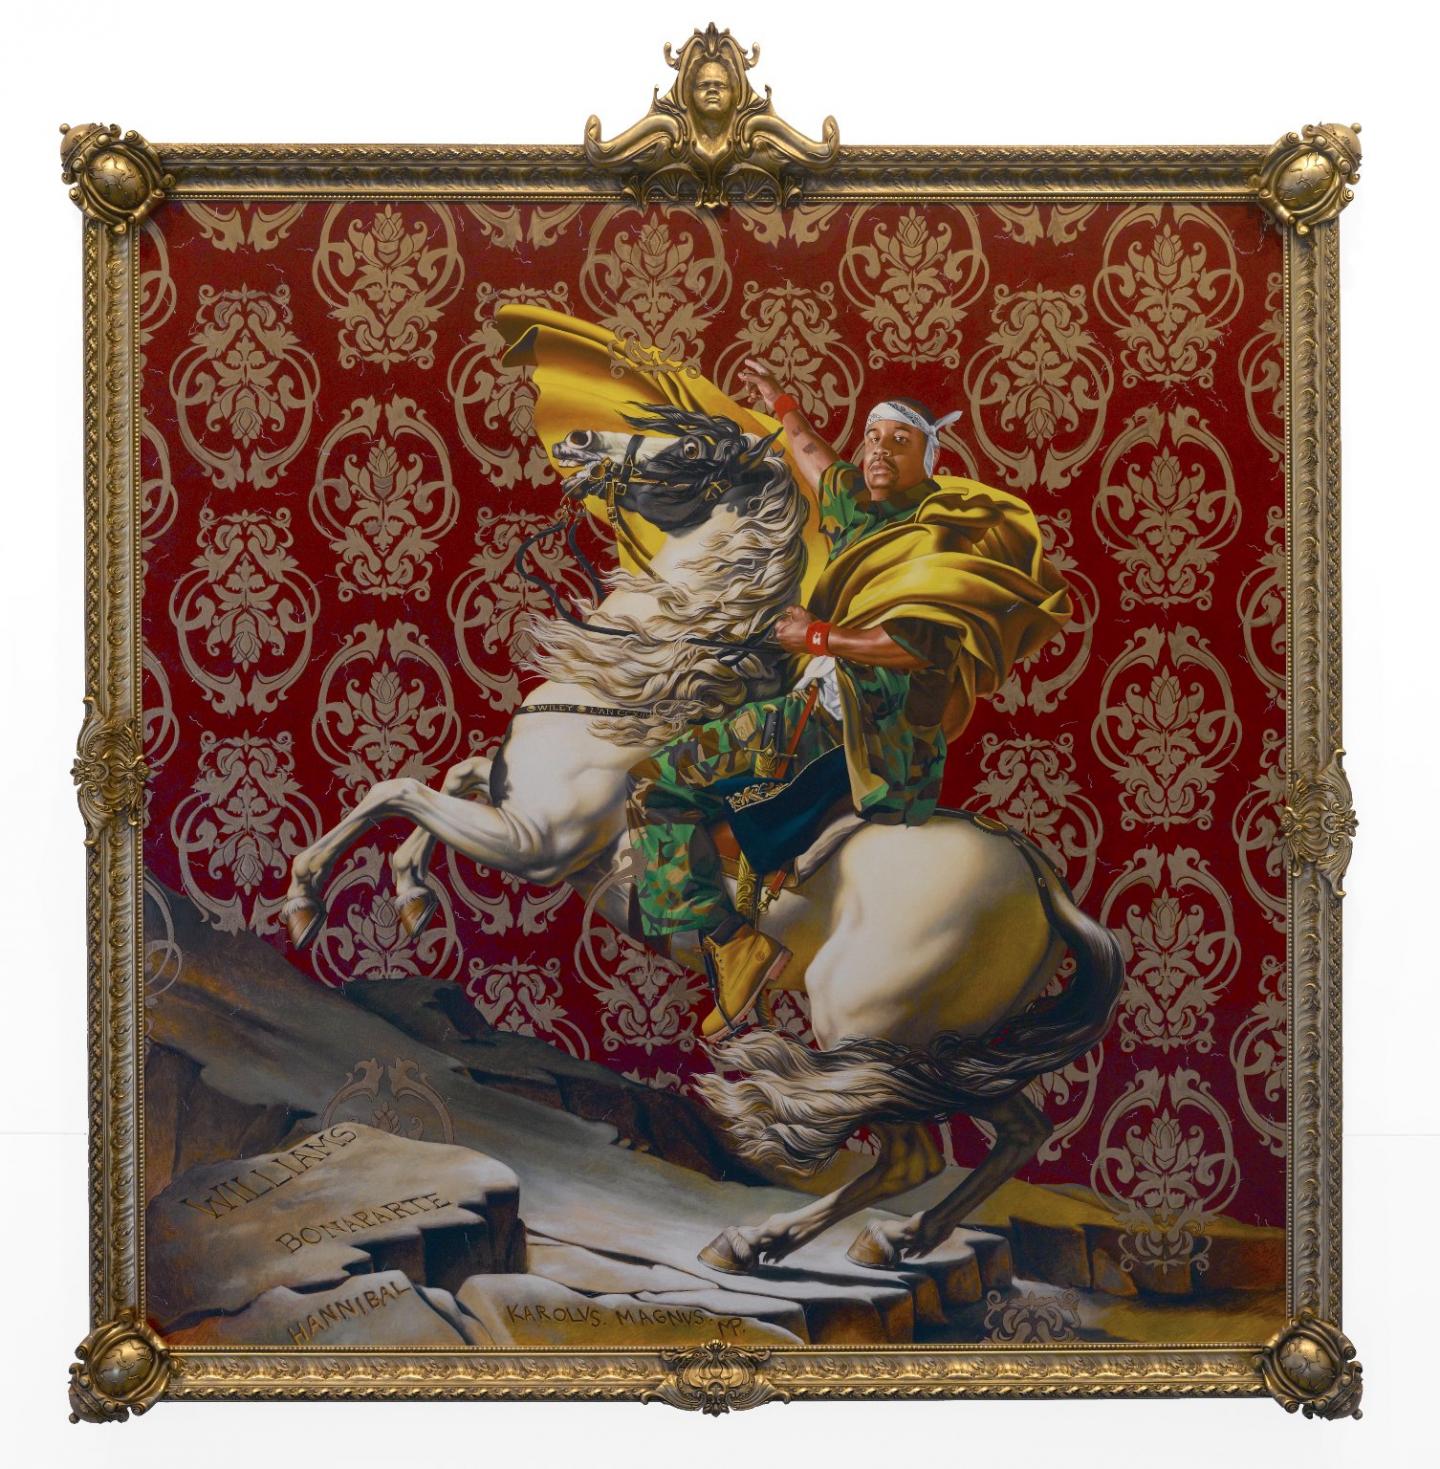 Napolean Leading the Army Over the Alps (2005) © Kehinde Wiley. Courtesy Sean Kelly Gallery, New York